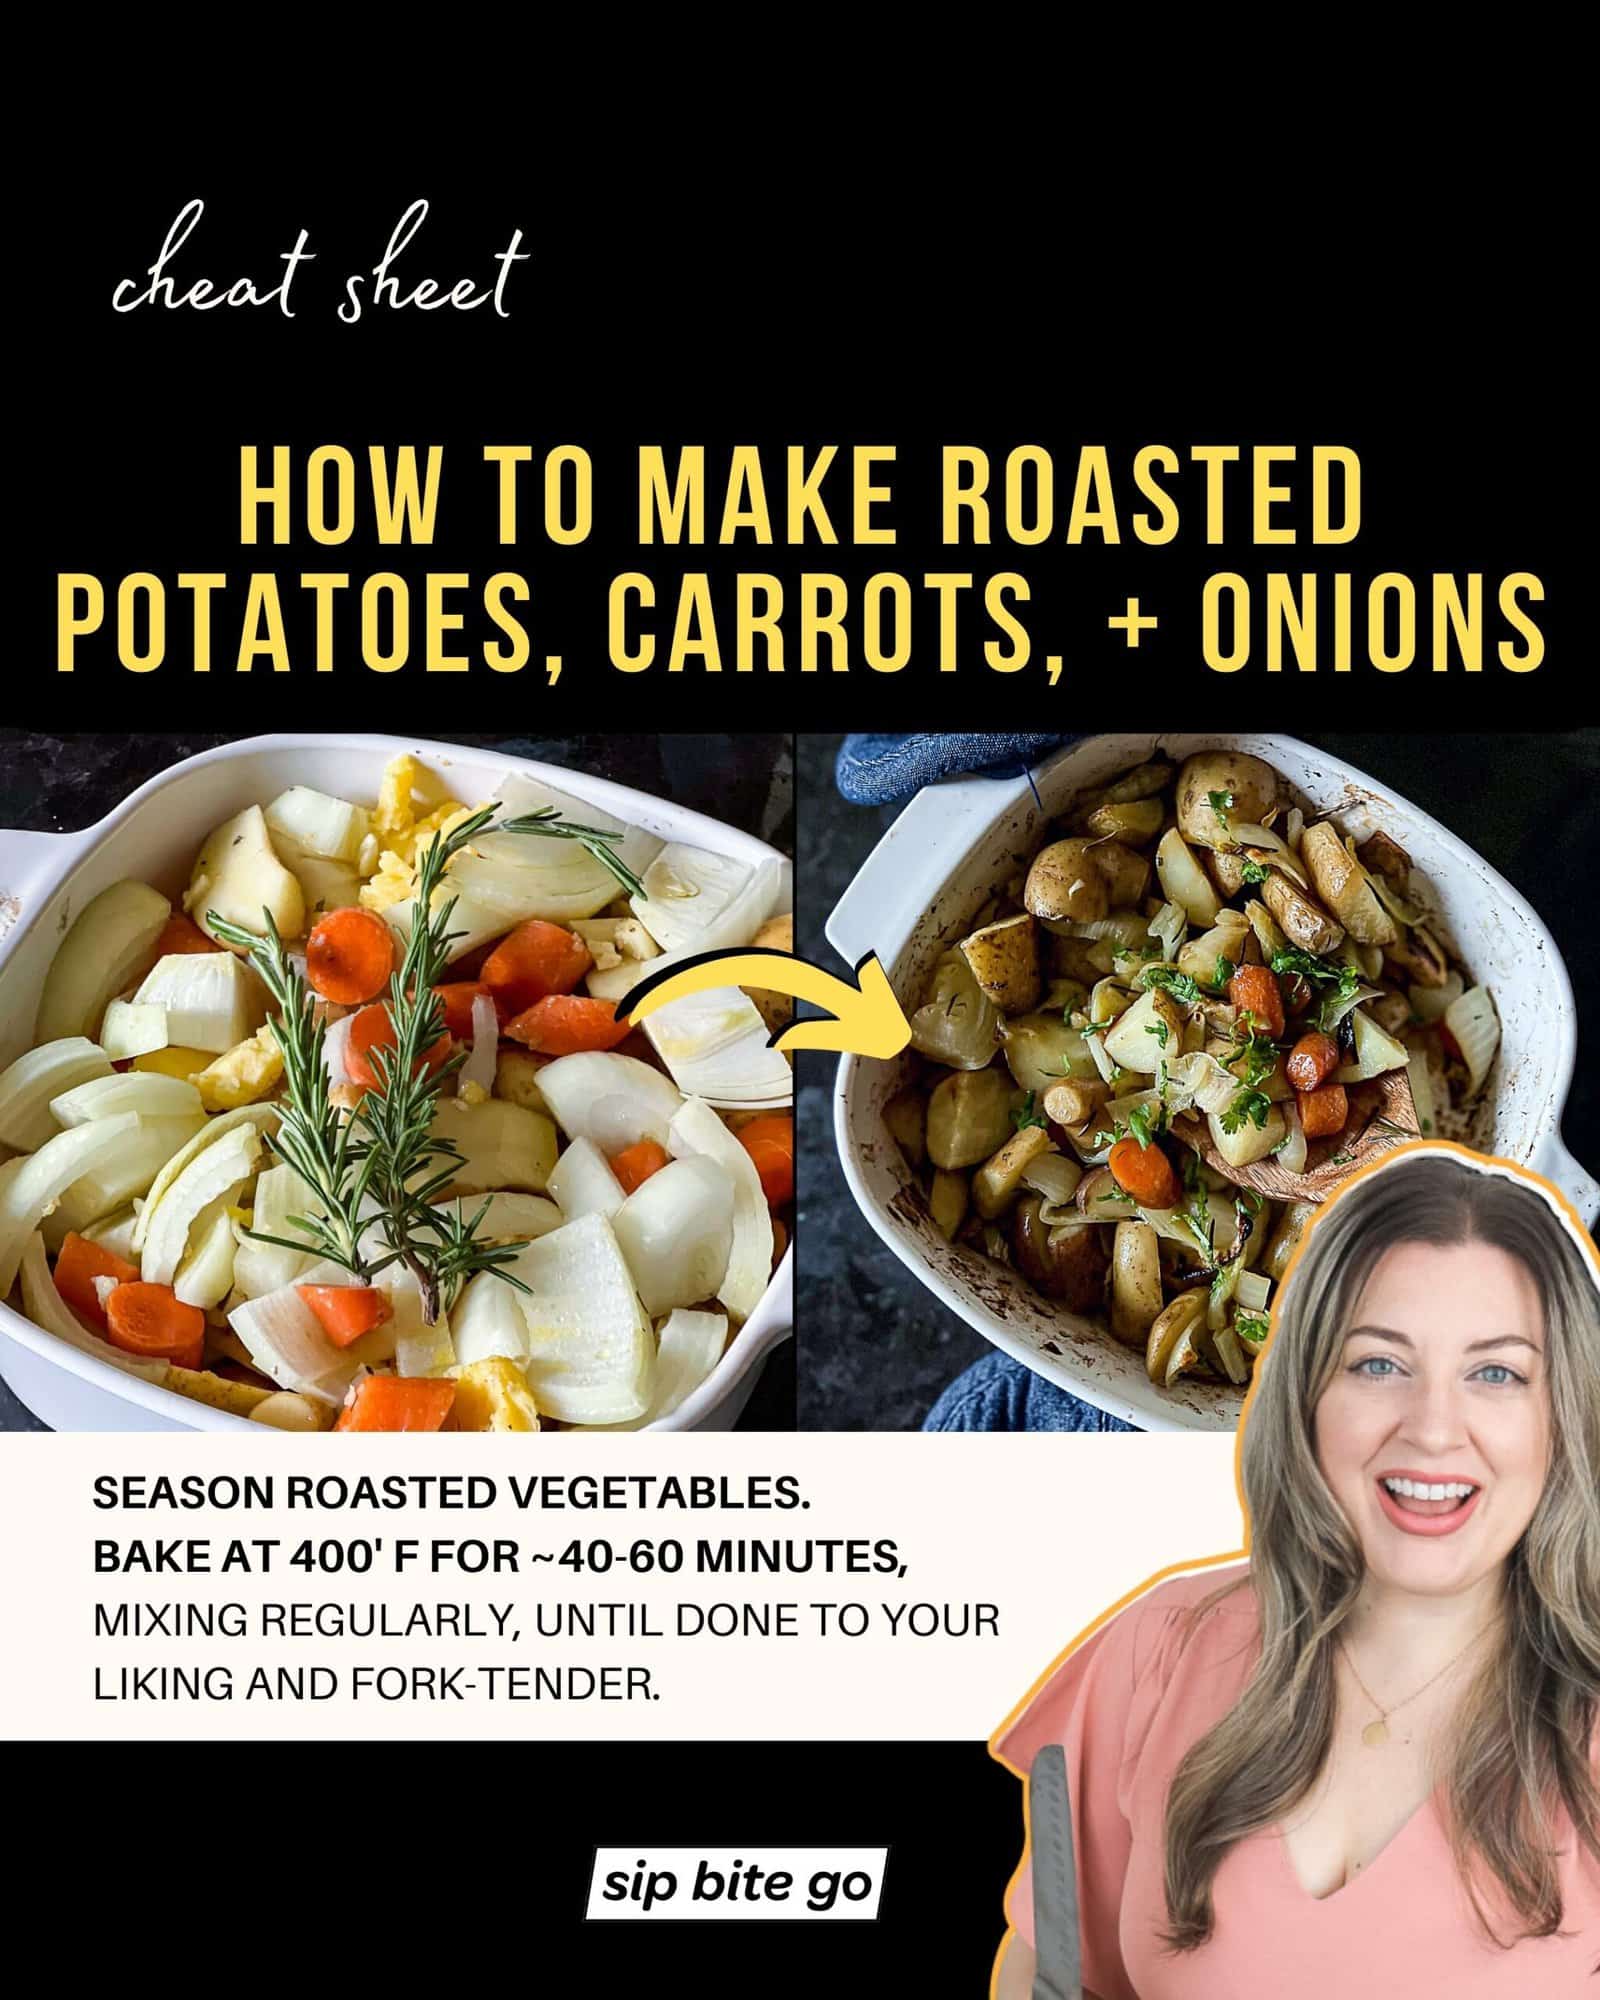 Infographic demonstrating recipe steps for how to make roasted potatoes, carrots, and onions